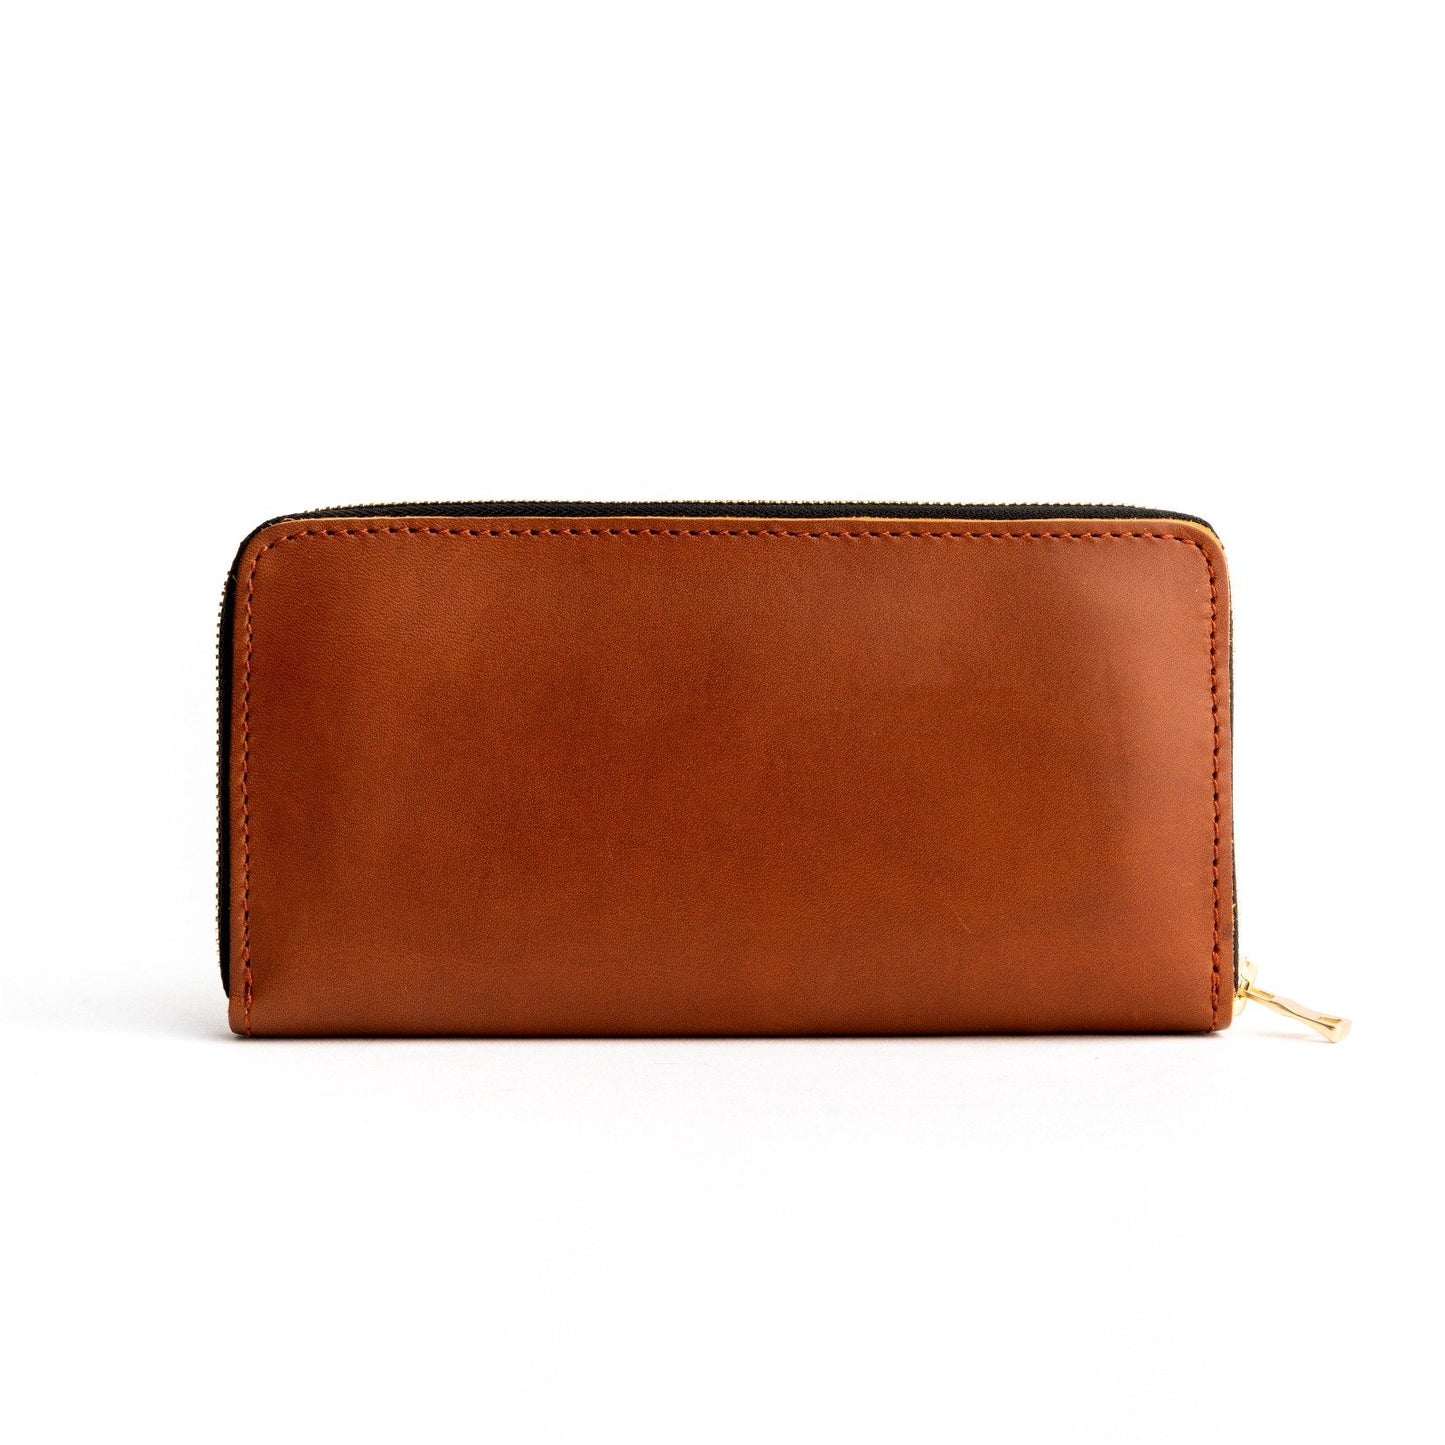 All Color: Honey | leather handmade wallet